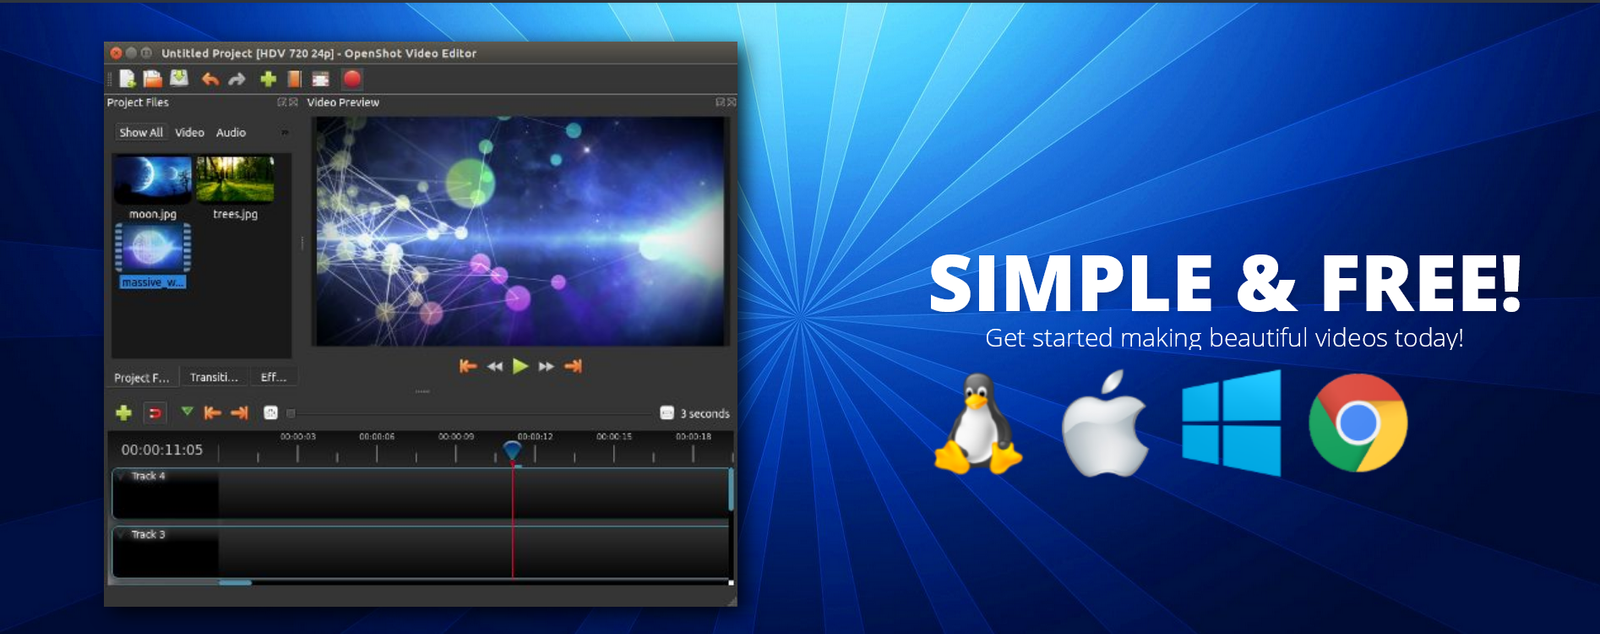 openshot video editor for windows 10 download free